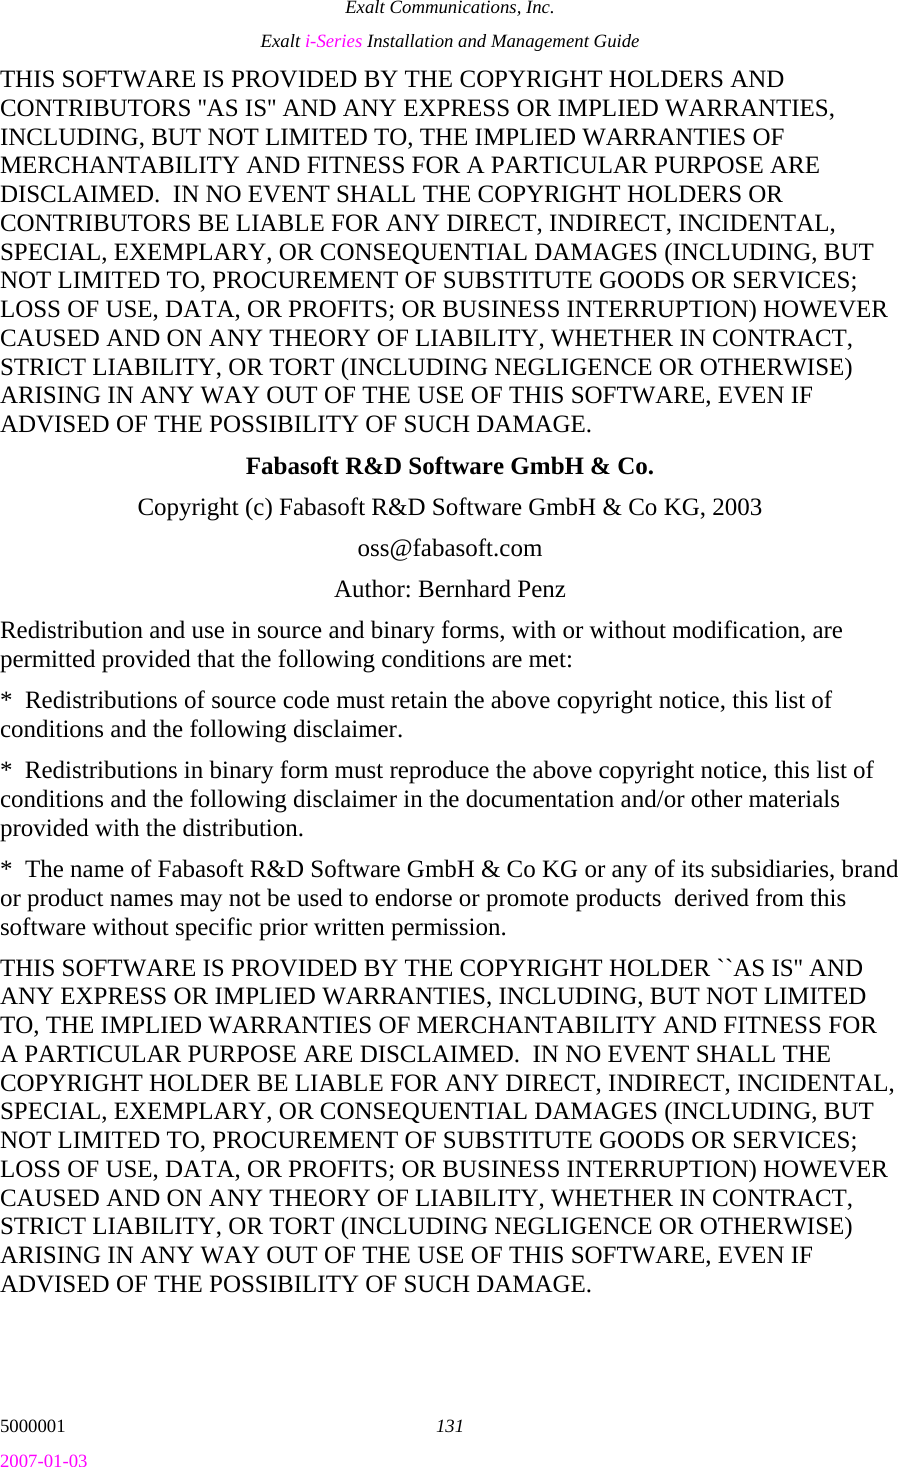 Exalt Communications, Inc. Exalt i-Series Installation and Management Guide 5000001  131 2007-01-03 THIS SOFTWARE IS PROVIDED BY THE COPYRIGHT HOLDERS AND CONTRIBUTORS &apos;&apos;AS IS&apos;&apos; AND ANY EXPRESS OR IMPLIED WARRANTIES, INCLUDING, BUT NOT LIMITED TO, THE IMPLIED WARRANTIES OF MERCHANTABILITY AND FITNESS FOR A PARTICULAR PURPOSE ARE DISCLAIMED.  IN NO EVENT SHALL THE COPYRIGHT HOLDERS OR CONTRIBUTORS BE LIABLE FOR ANY DIRECT, INDIRECT, INCIDENTAL, SPECIAL, EXEMPLARY, OR CONSEQUENTIAL DAMAGES (INCLUDING, BUT NOT LIMITED TO, PROCUREMENT OF SUBSTITUTE GOODS OR SERVICES; LOSS OF USE, DATA, OR PROFITS; OR BUSINESS INTERRUPTION) HOWEVER CAUSED AND ON ANY THEORY OF LIABILITY, WHETHER IN CONTRACT, STRICT LIABILITY, OR TORT (INCLUDING NEGLIGENCE OR OTHERWISE) ARISING IN ANY WAY OUT OF THE USE OF THIS SOFTWARE, EVEN IF ADVISED OF THE POSSIBILITY OF SUCH DAMAGE. Fabasoft R&amp;D Software GmbH &amp; Co. Copyright (c) Fabasoft R&amp;D Software GmbH &amp; Co KG, 2003 oss@fabasoft.com Author: Bernhard Penz Redistribution and use in source and binary forms, with or without modification, are permitted provided that the following conditions are met: *  Redistributions of source code must retain the above copyright notice, this list of conditions and the following disclaimer. *  Redistributions in binary form must reproduce the above copyright notice, this list of conditions and the following disclaimer in the documentation and/or other materials provided with the distribution. *  The name of Fabasoft R&amp;D Software GmbH &amp; Co KG or any of its subsidiaries, brand or product names may not be used to endorse or promote products  derived from this software without specific prior written permission. THIS SOFTWARE IS PROVIDED BY THE COPYRIGHT HOLDER ``AS IS&apos;&apos; AND ANY EXPRESS OR IMPLIED WARRANTIES, INCLUDING, BUT NOT LIMITED TO, THE IMPLIED WARRANTIES OF MERCHANTABILITY AND FITNESS FOR A PARTICULAR PURPOSE ARE DISCLAIMED.  IN NO EVENT SHALL THE COPYRIGHT HOLDER BE LIABLE FOR ANY DIRECT, INDIRECT, INCIDENTAL, SPECIAL, EXEMPLARY, OR CONSEQUENTIAL DAMAGES (INCLUDING, BUT NOT LIMITED TO, PROCUREMENT OF SUBSTITUTE GOODS OR SERVICES; LOSS OF USE, DATA, OR PROFITS; OR BUSINESS INTERRUPTION) HOWEVER CAUSED AND ON ANY THEORY OF LIABILITY, WHETHER IN CONTRACT, STRICT LIABILITY, OR TORT (INCLUDING NEGLIGENCE OR OTHERWISE) ARISING IN ANY WAY OUT OF THE USE OF THIS SOFTWARE, EVEN IF ADVISED OF THE POSSIBILITY OF SUCH DAMAGE. 